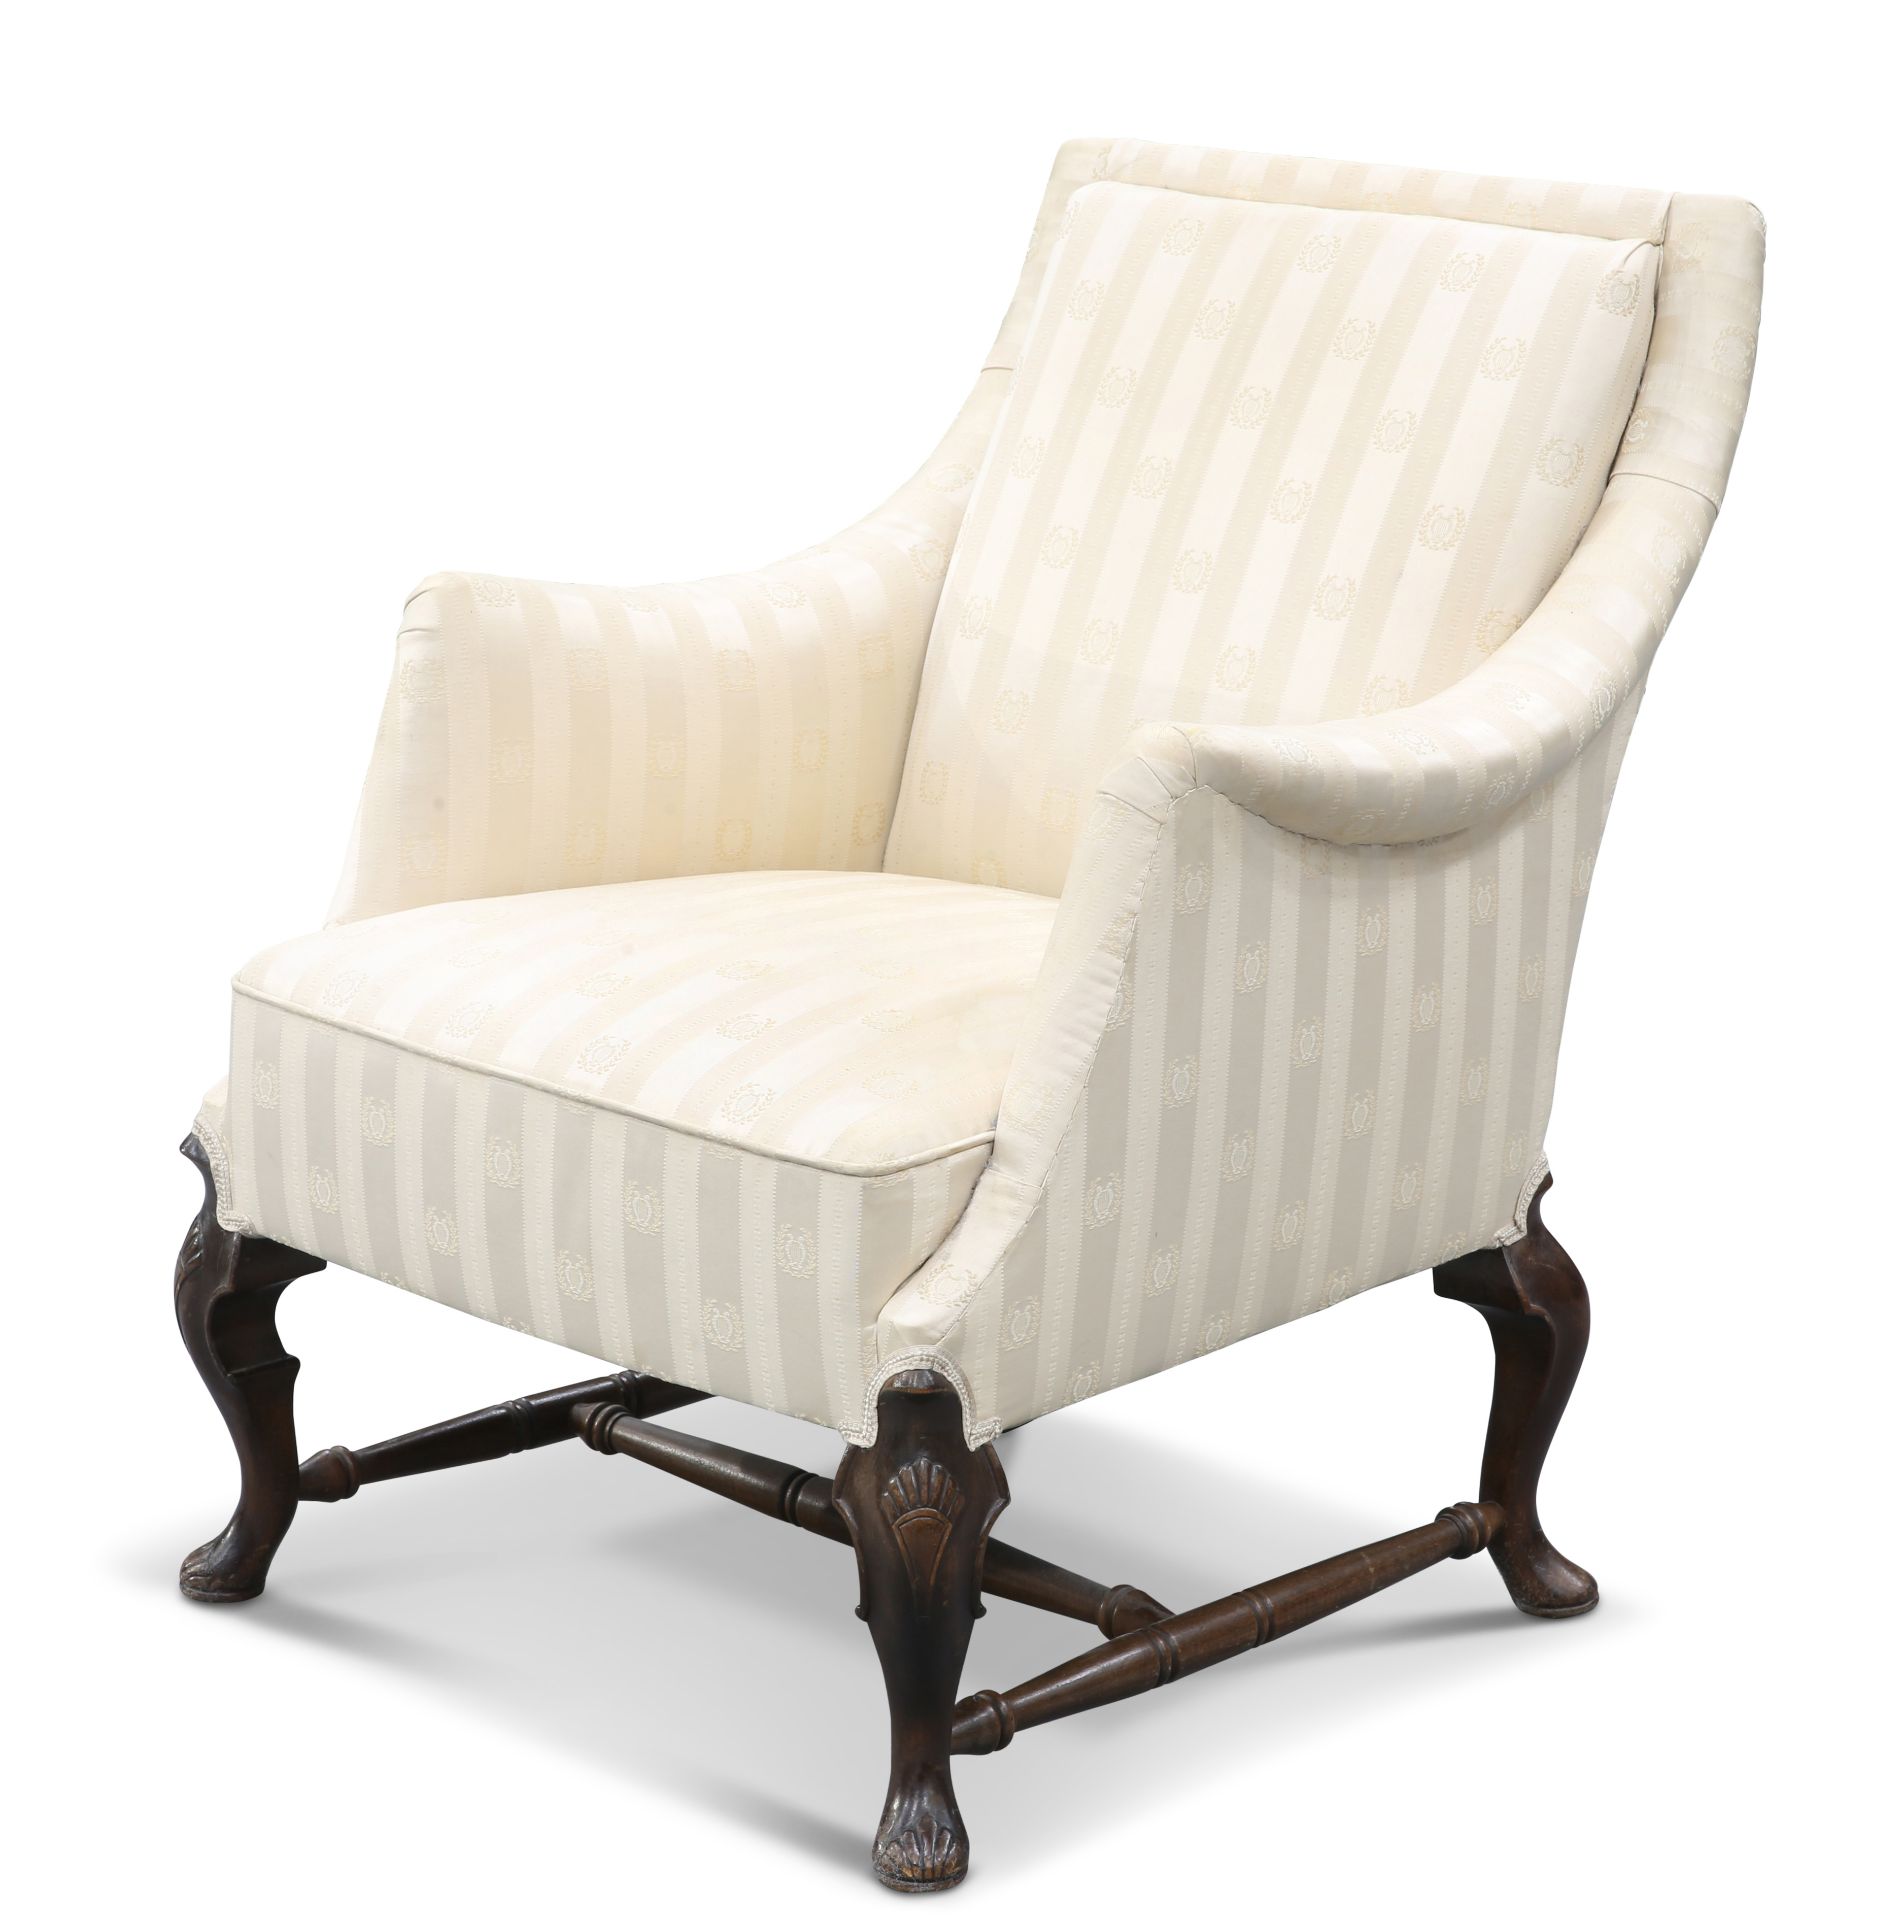 AN EARLY 20TH CENTURY WALNUT AND UPHOLSTERED ARMCHAIR